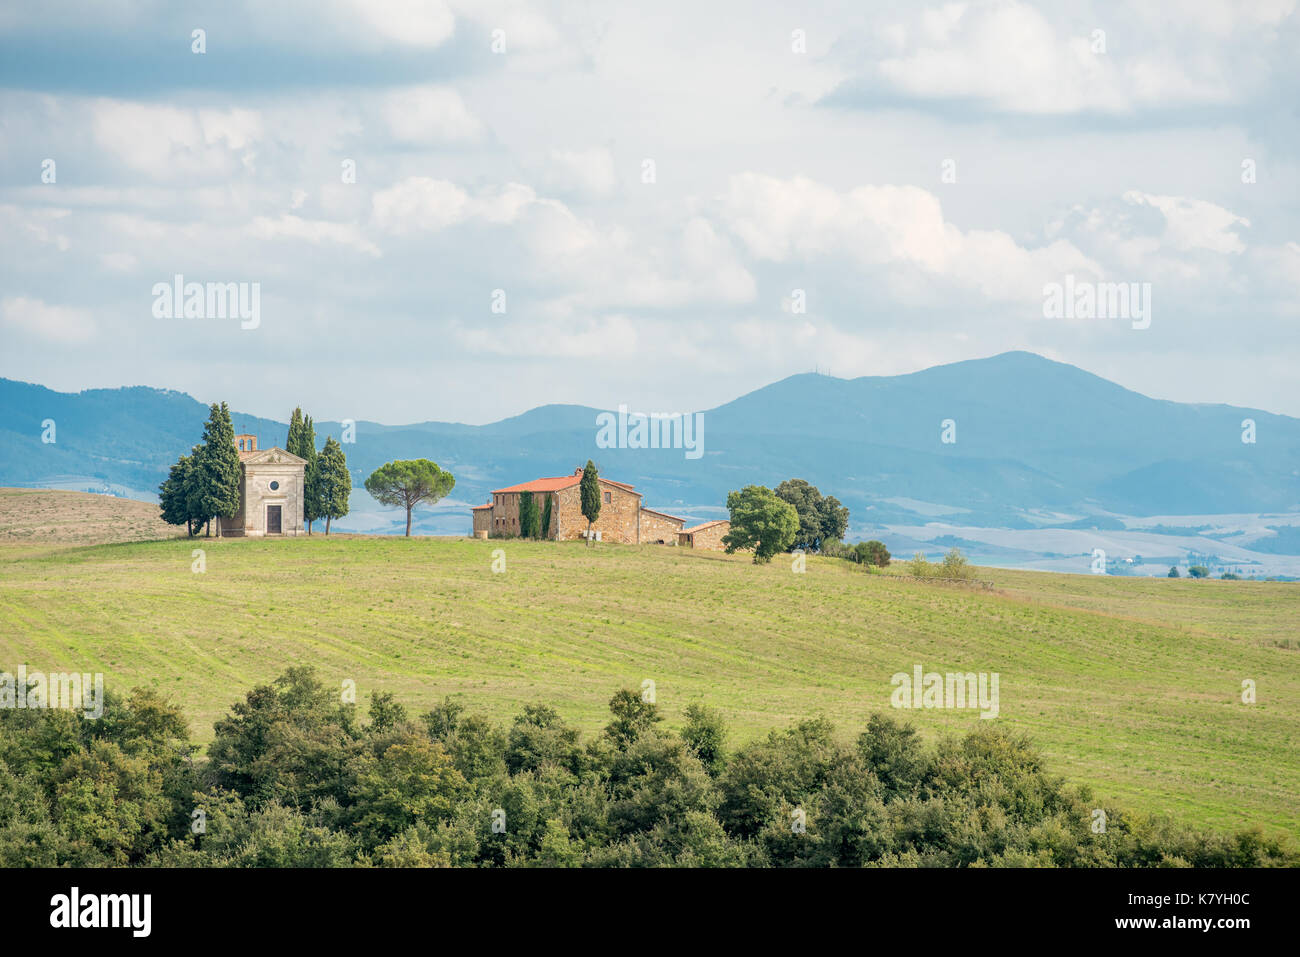 Chapel of the Madonna di Vitaleta in Val d'Orcia, Tuscany, Italy. Monte Amiata visible in the background. Stock Photo